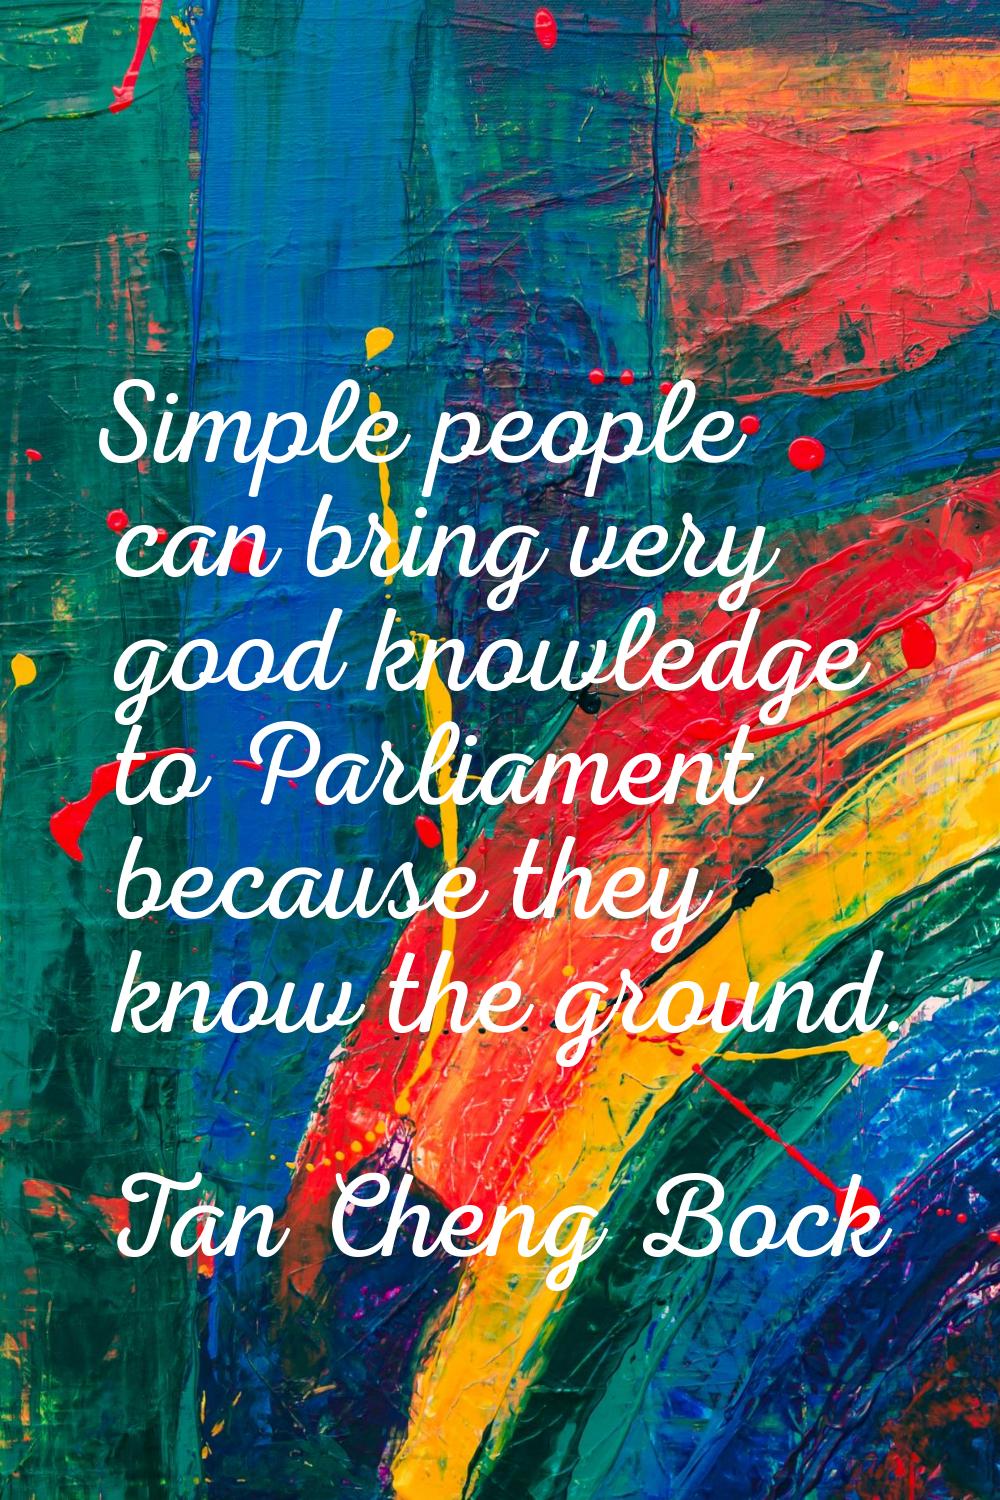 Simple people can bring very good knowledge to Parliament because they know the ground.